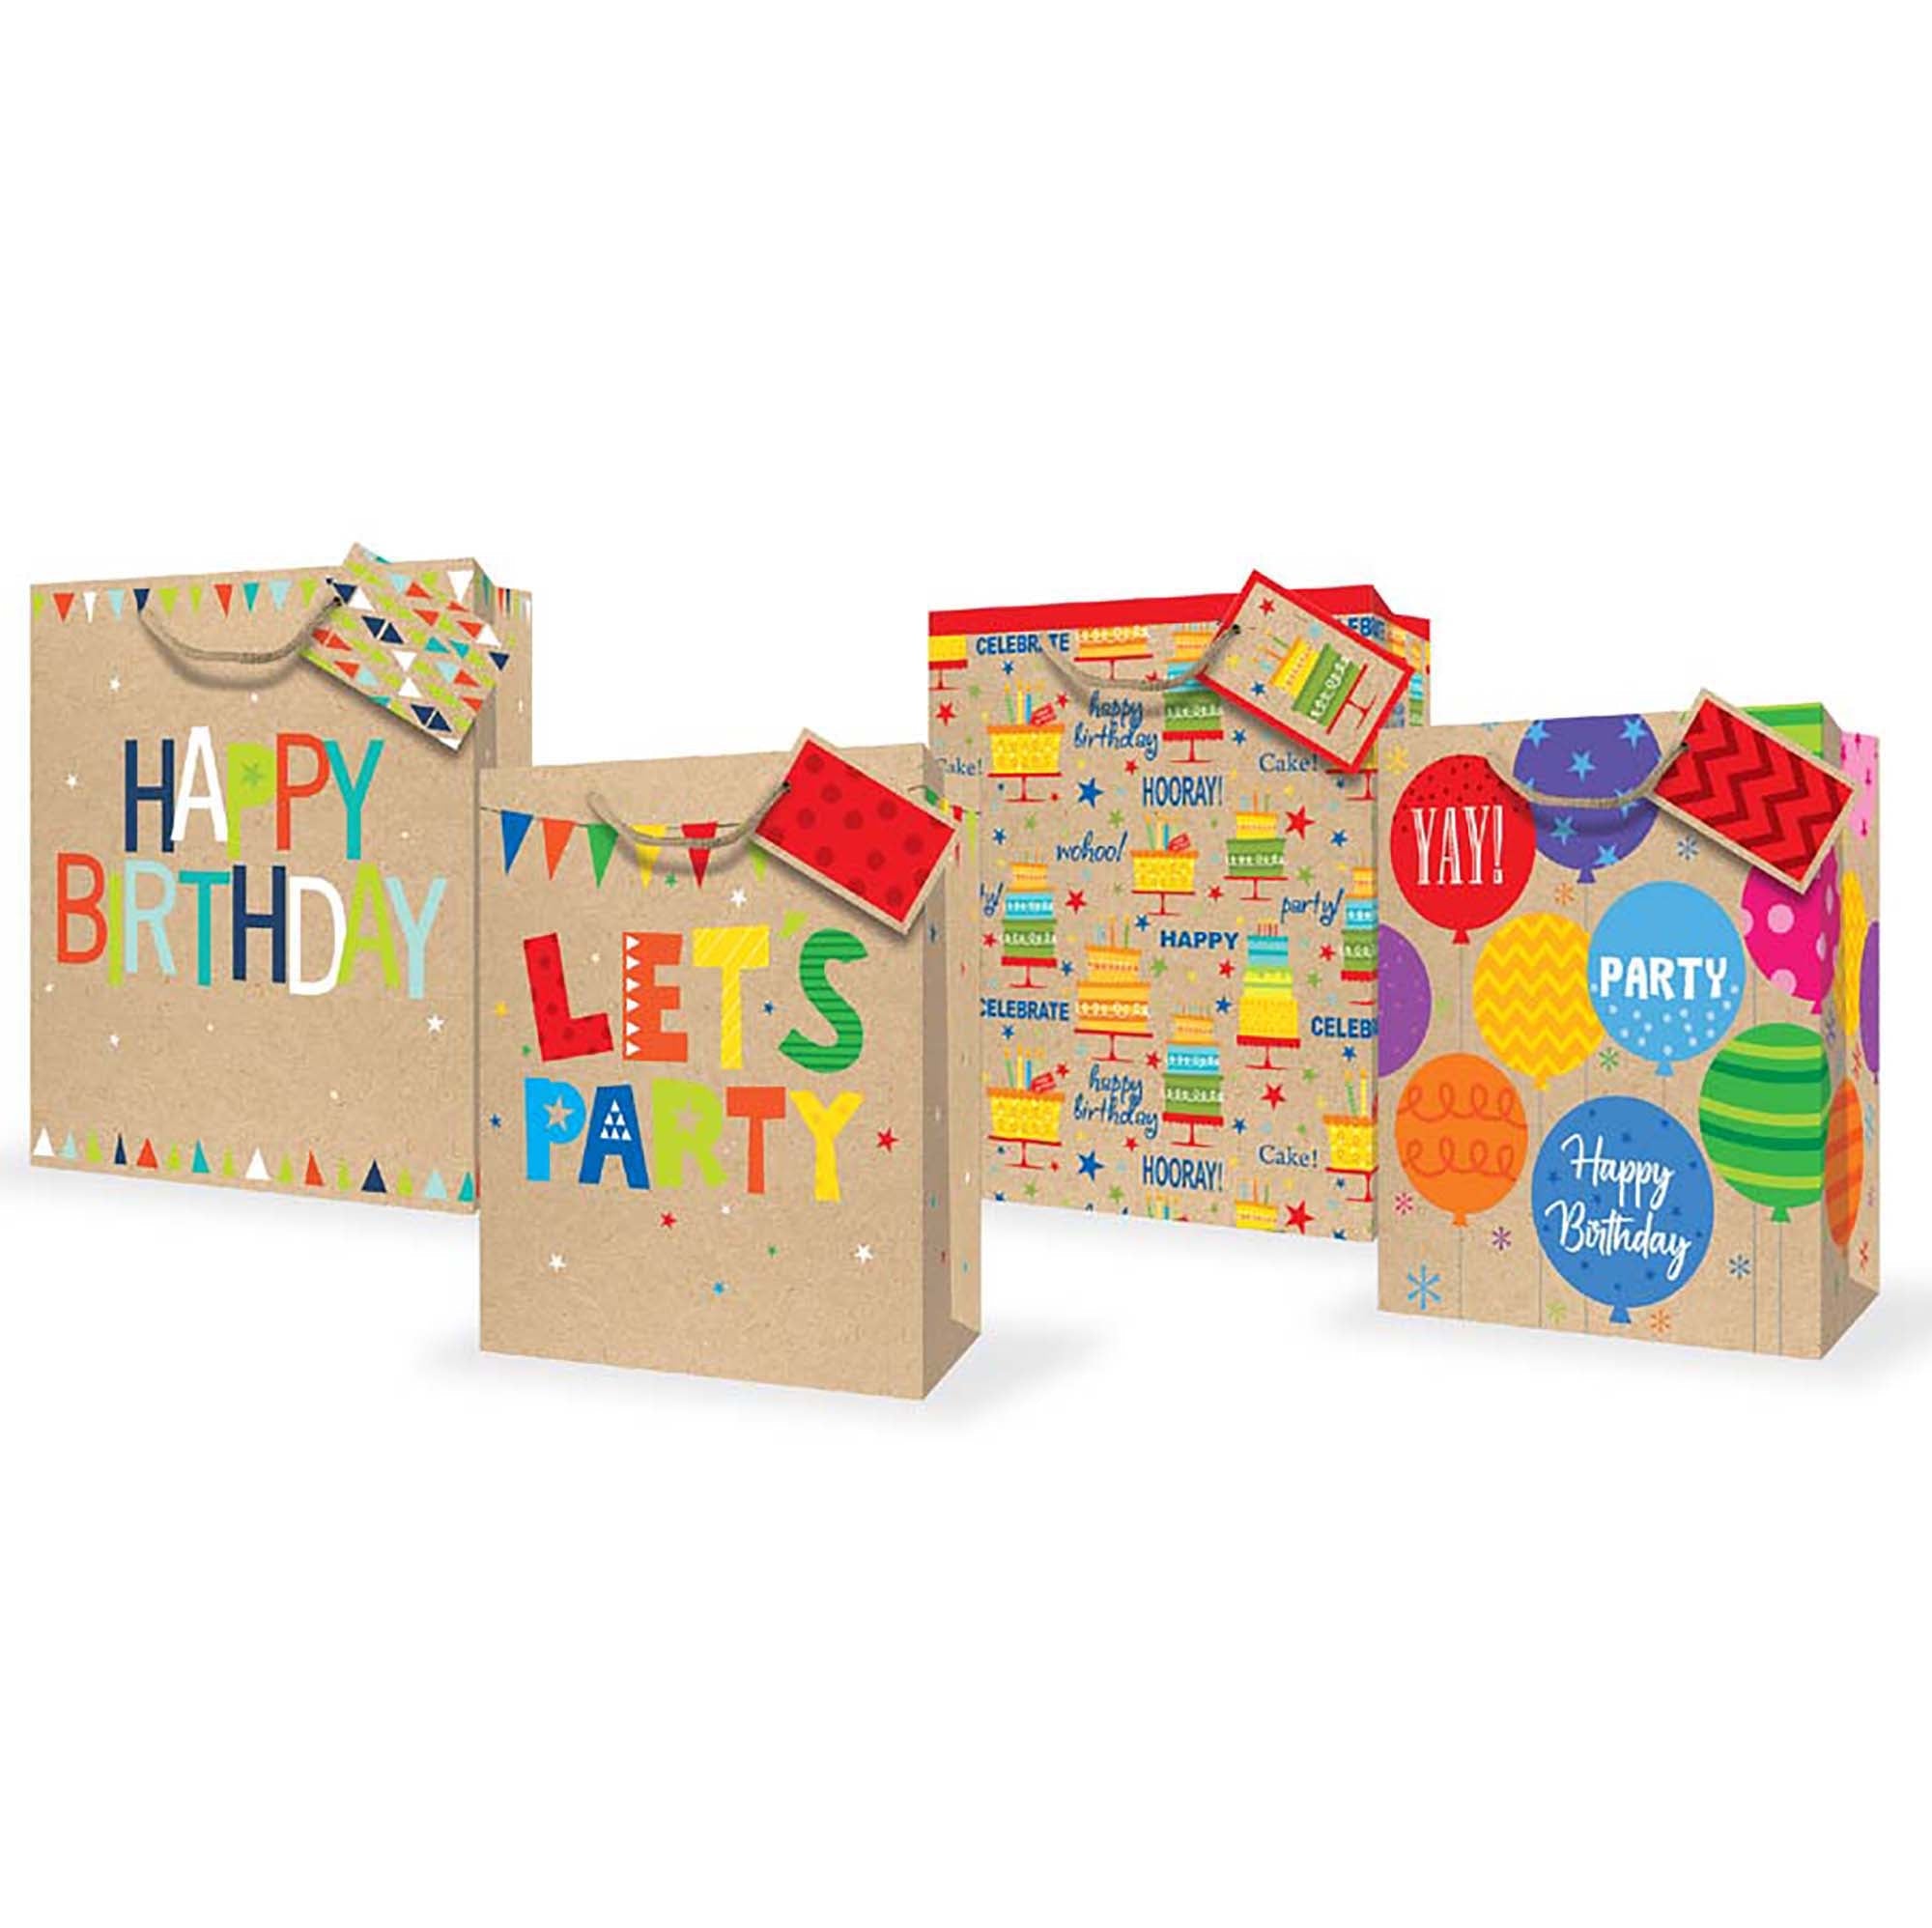 Mill Brook Gift Bag - Lets Party Large 10.5x12.75x5.5in